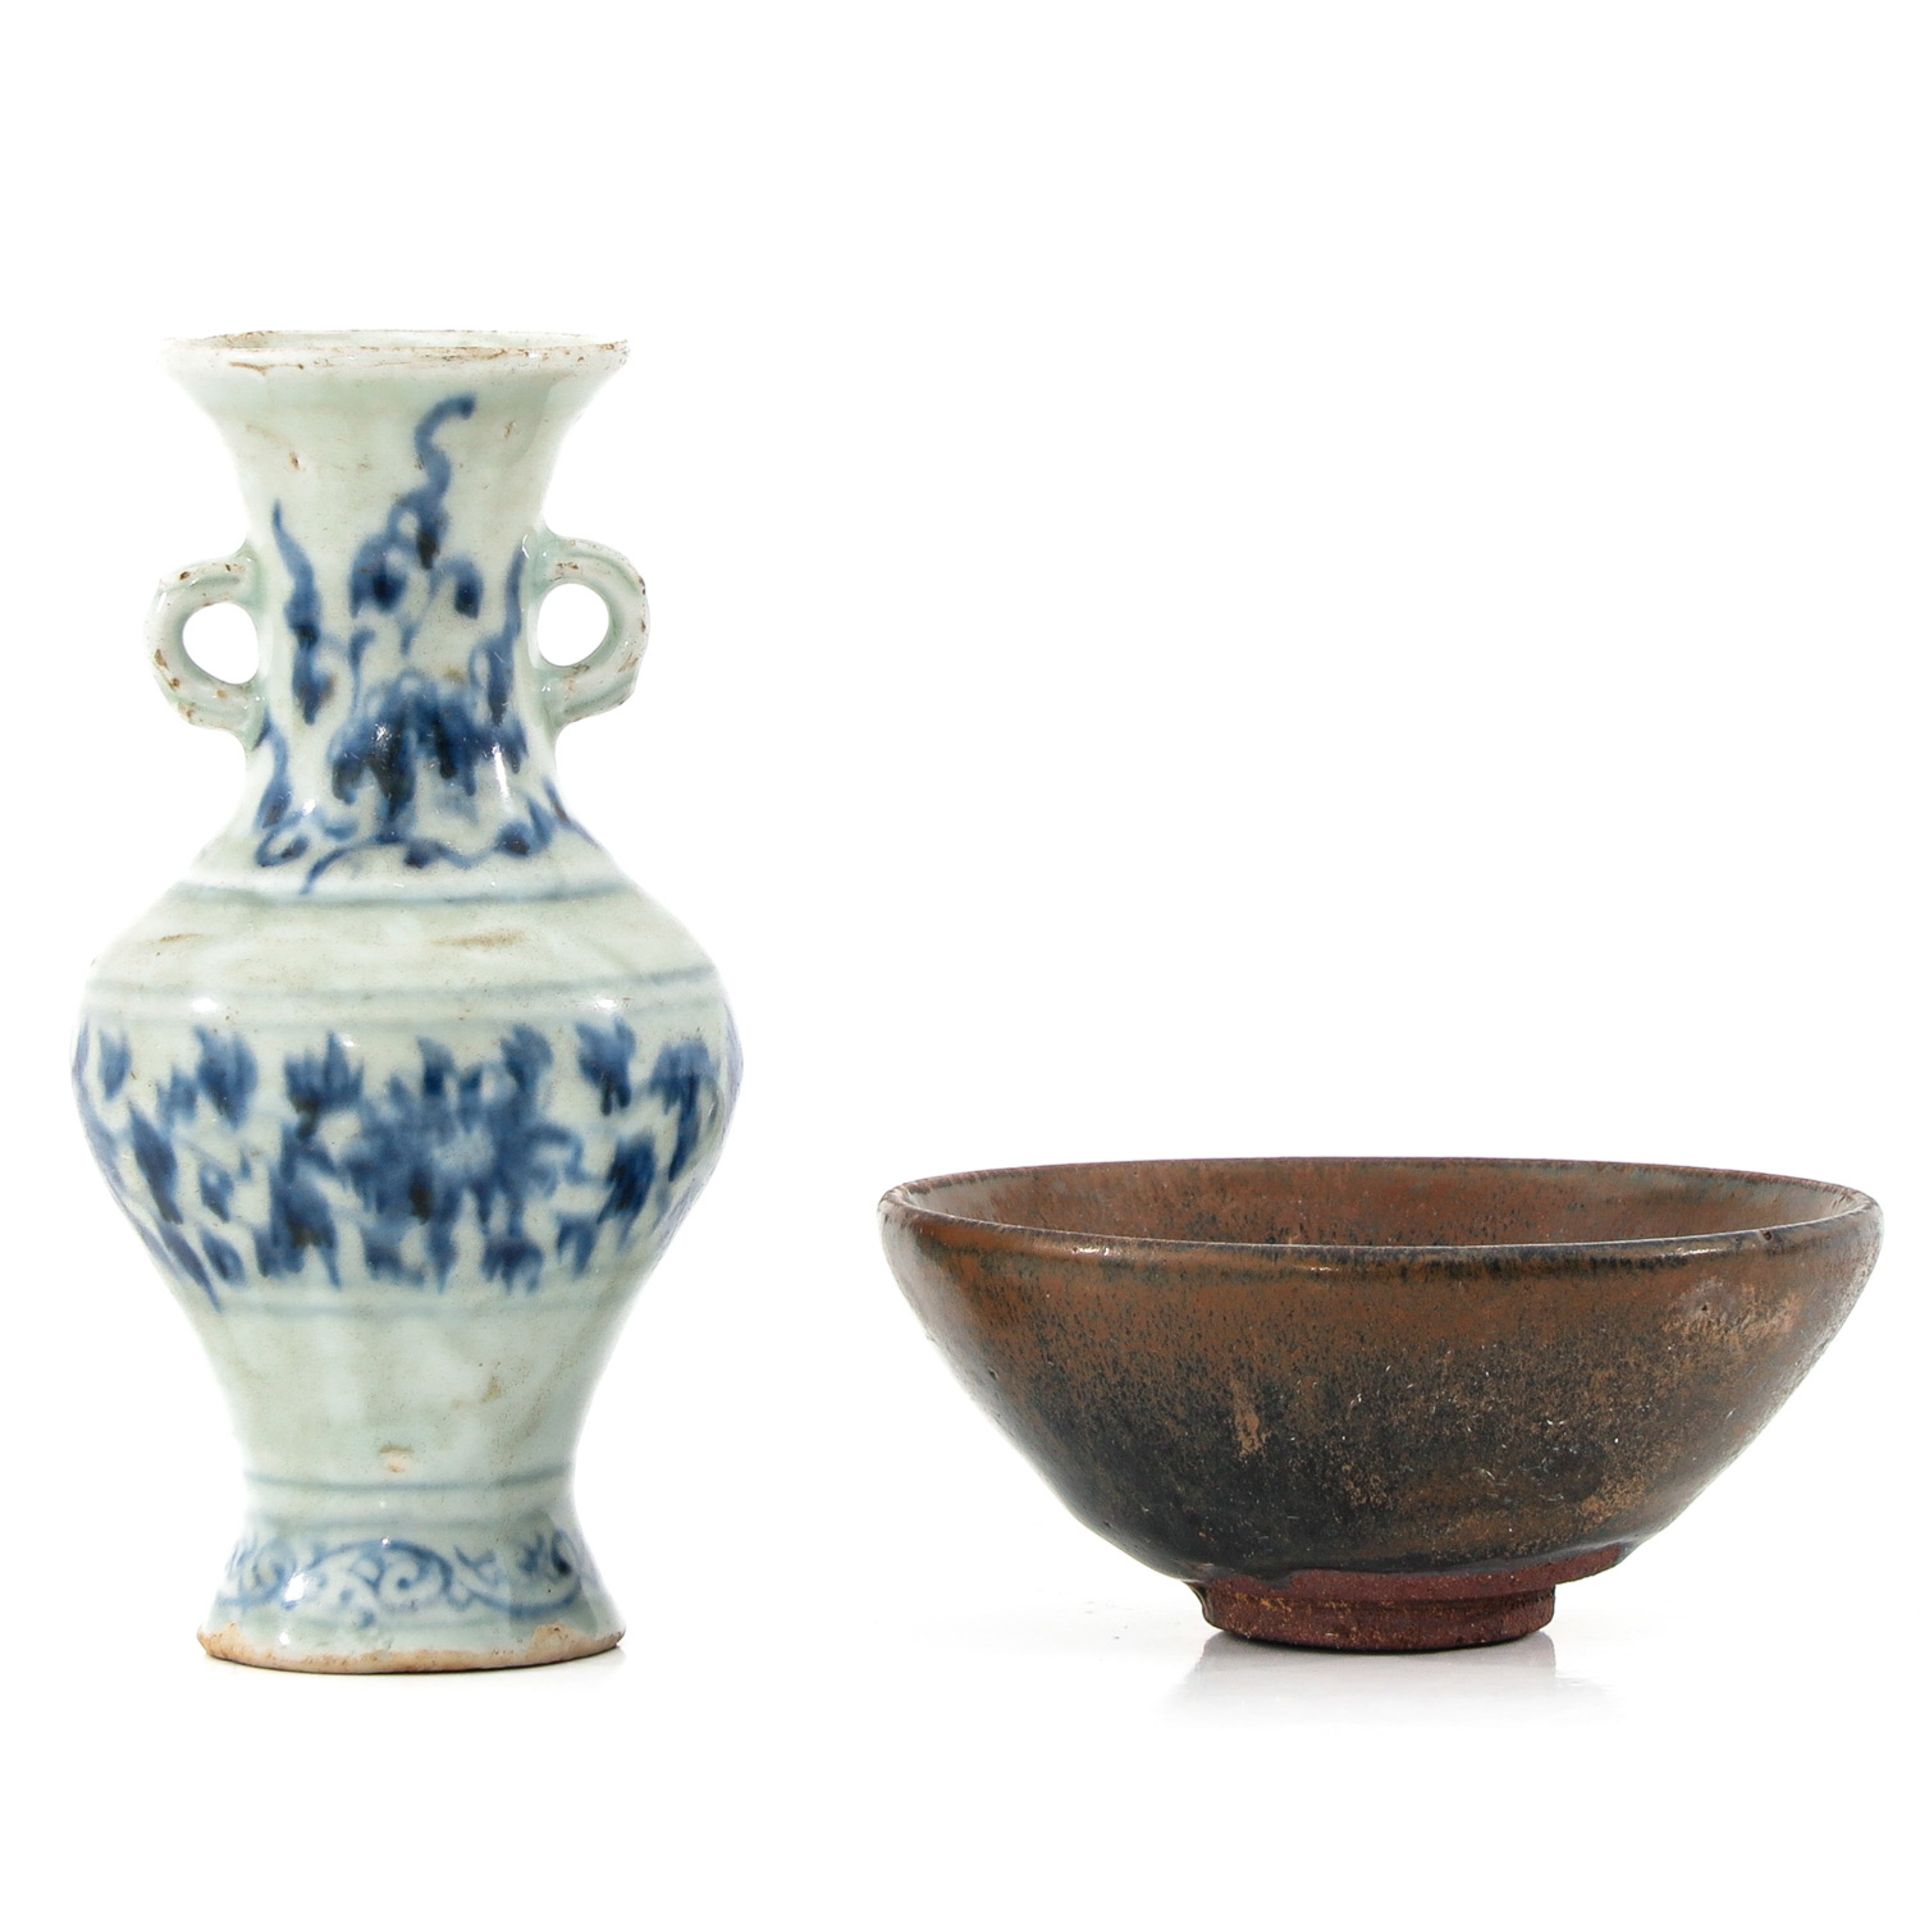 A Small Vase and Tea Bowl - Image 3 of 10